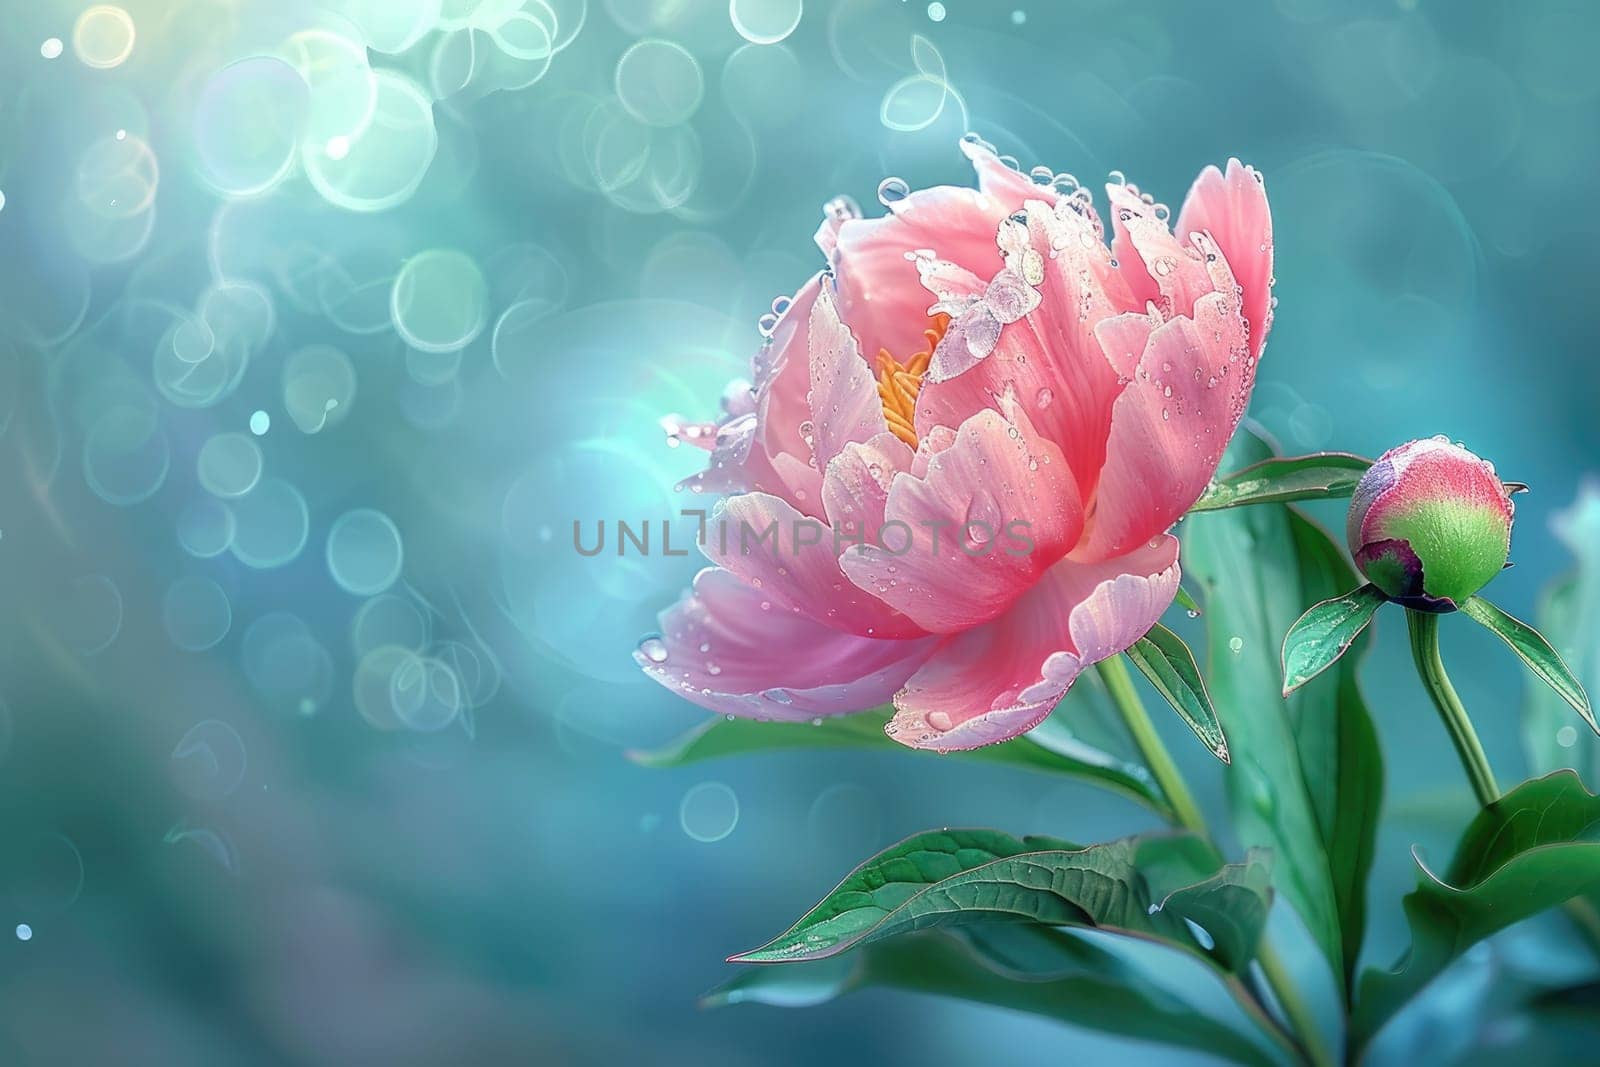 Close up view. Beautiful Peony isolated with drops of water on the petals